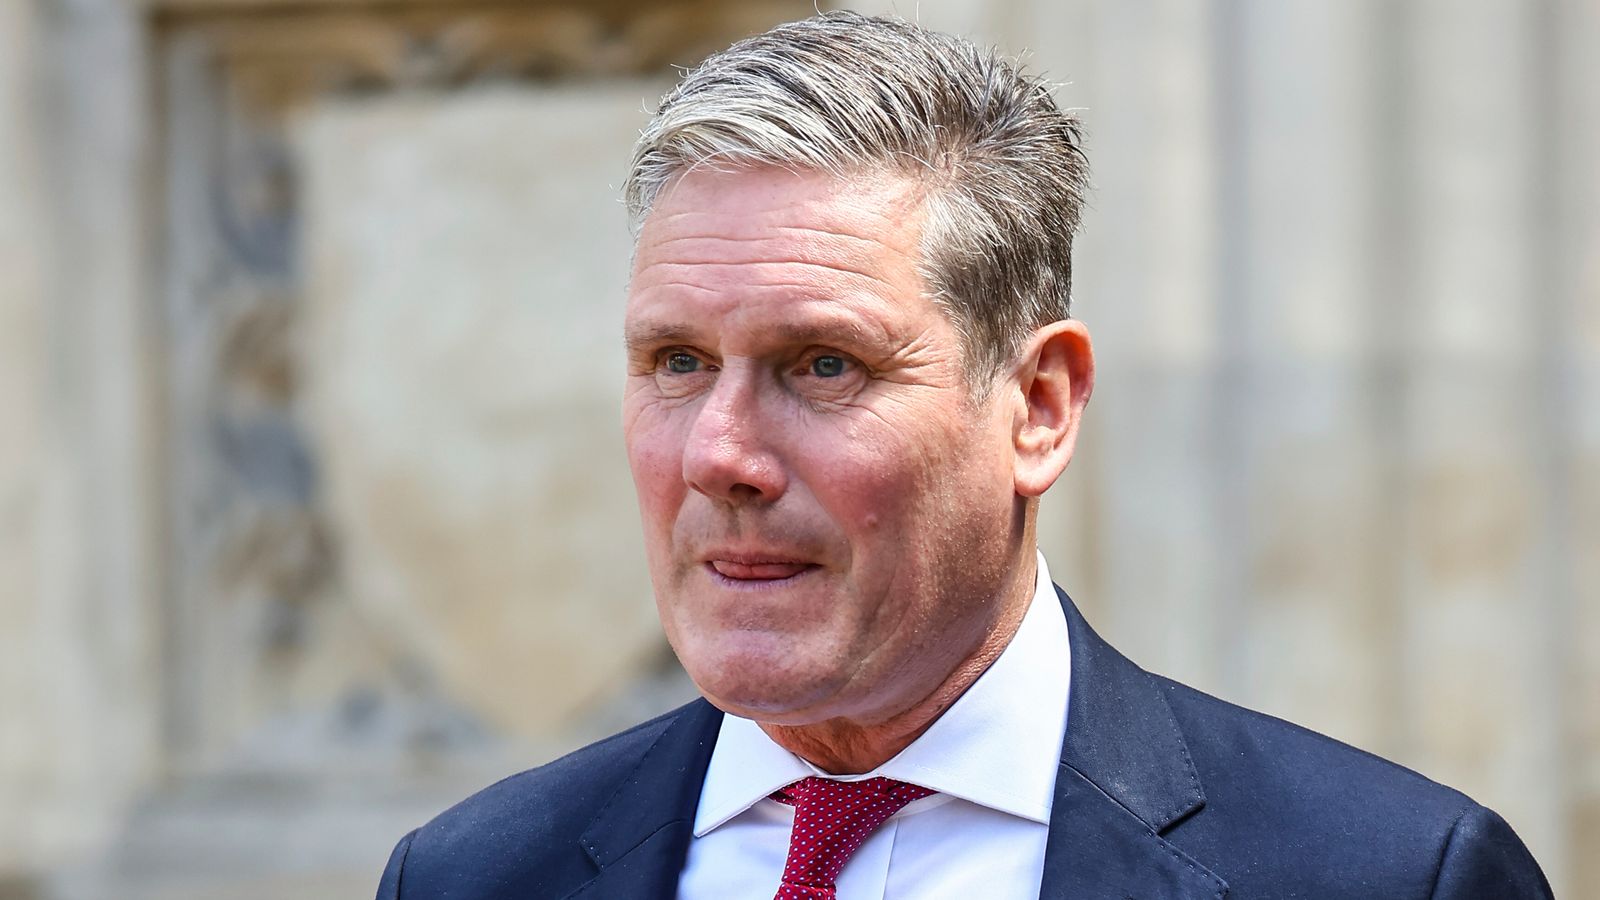 Israel-Hamas war: Ceasefire in Gaza risks more violence, Starmer expected to say in speech